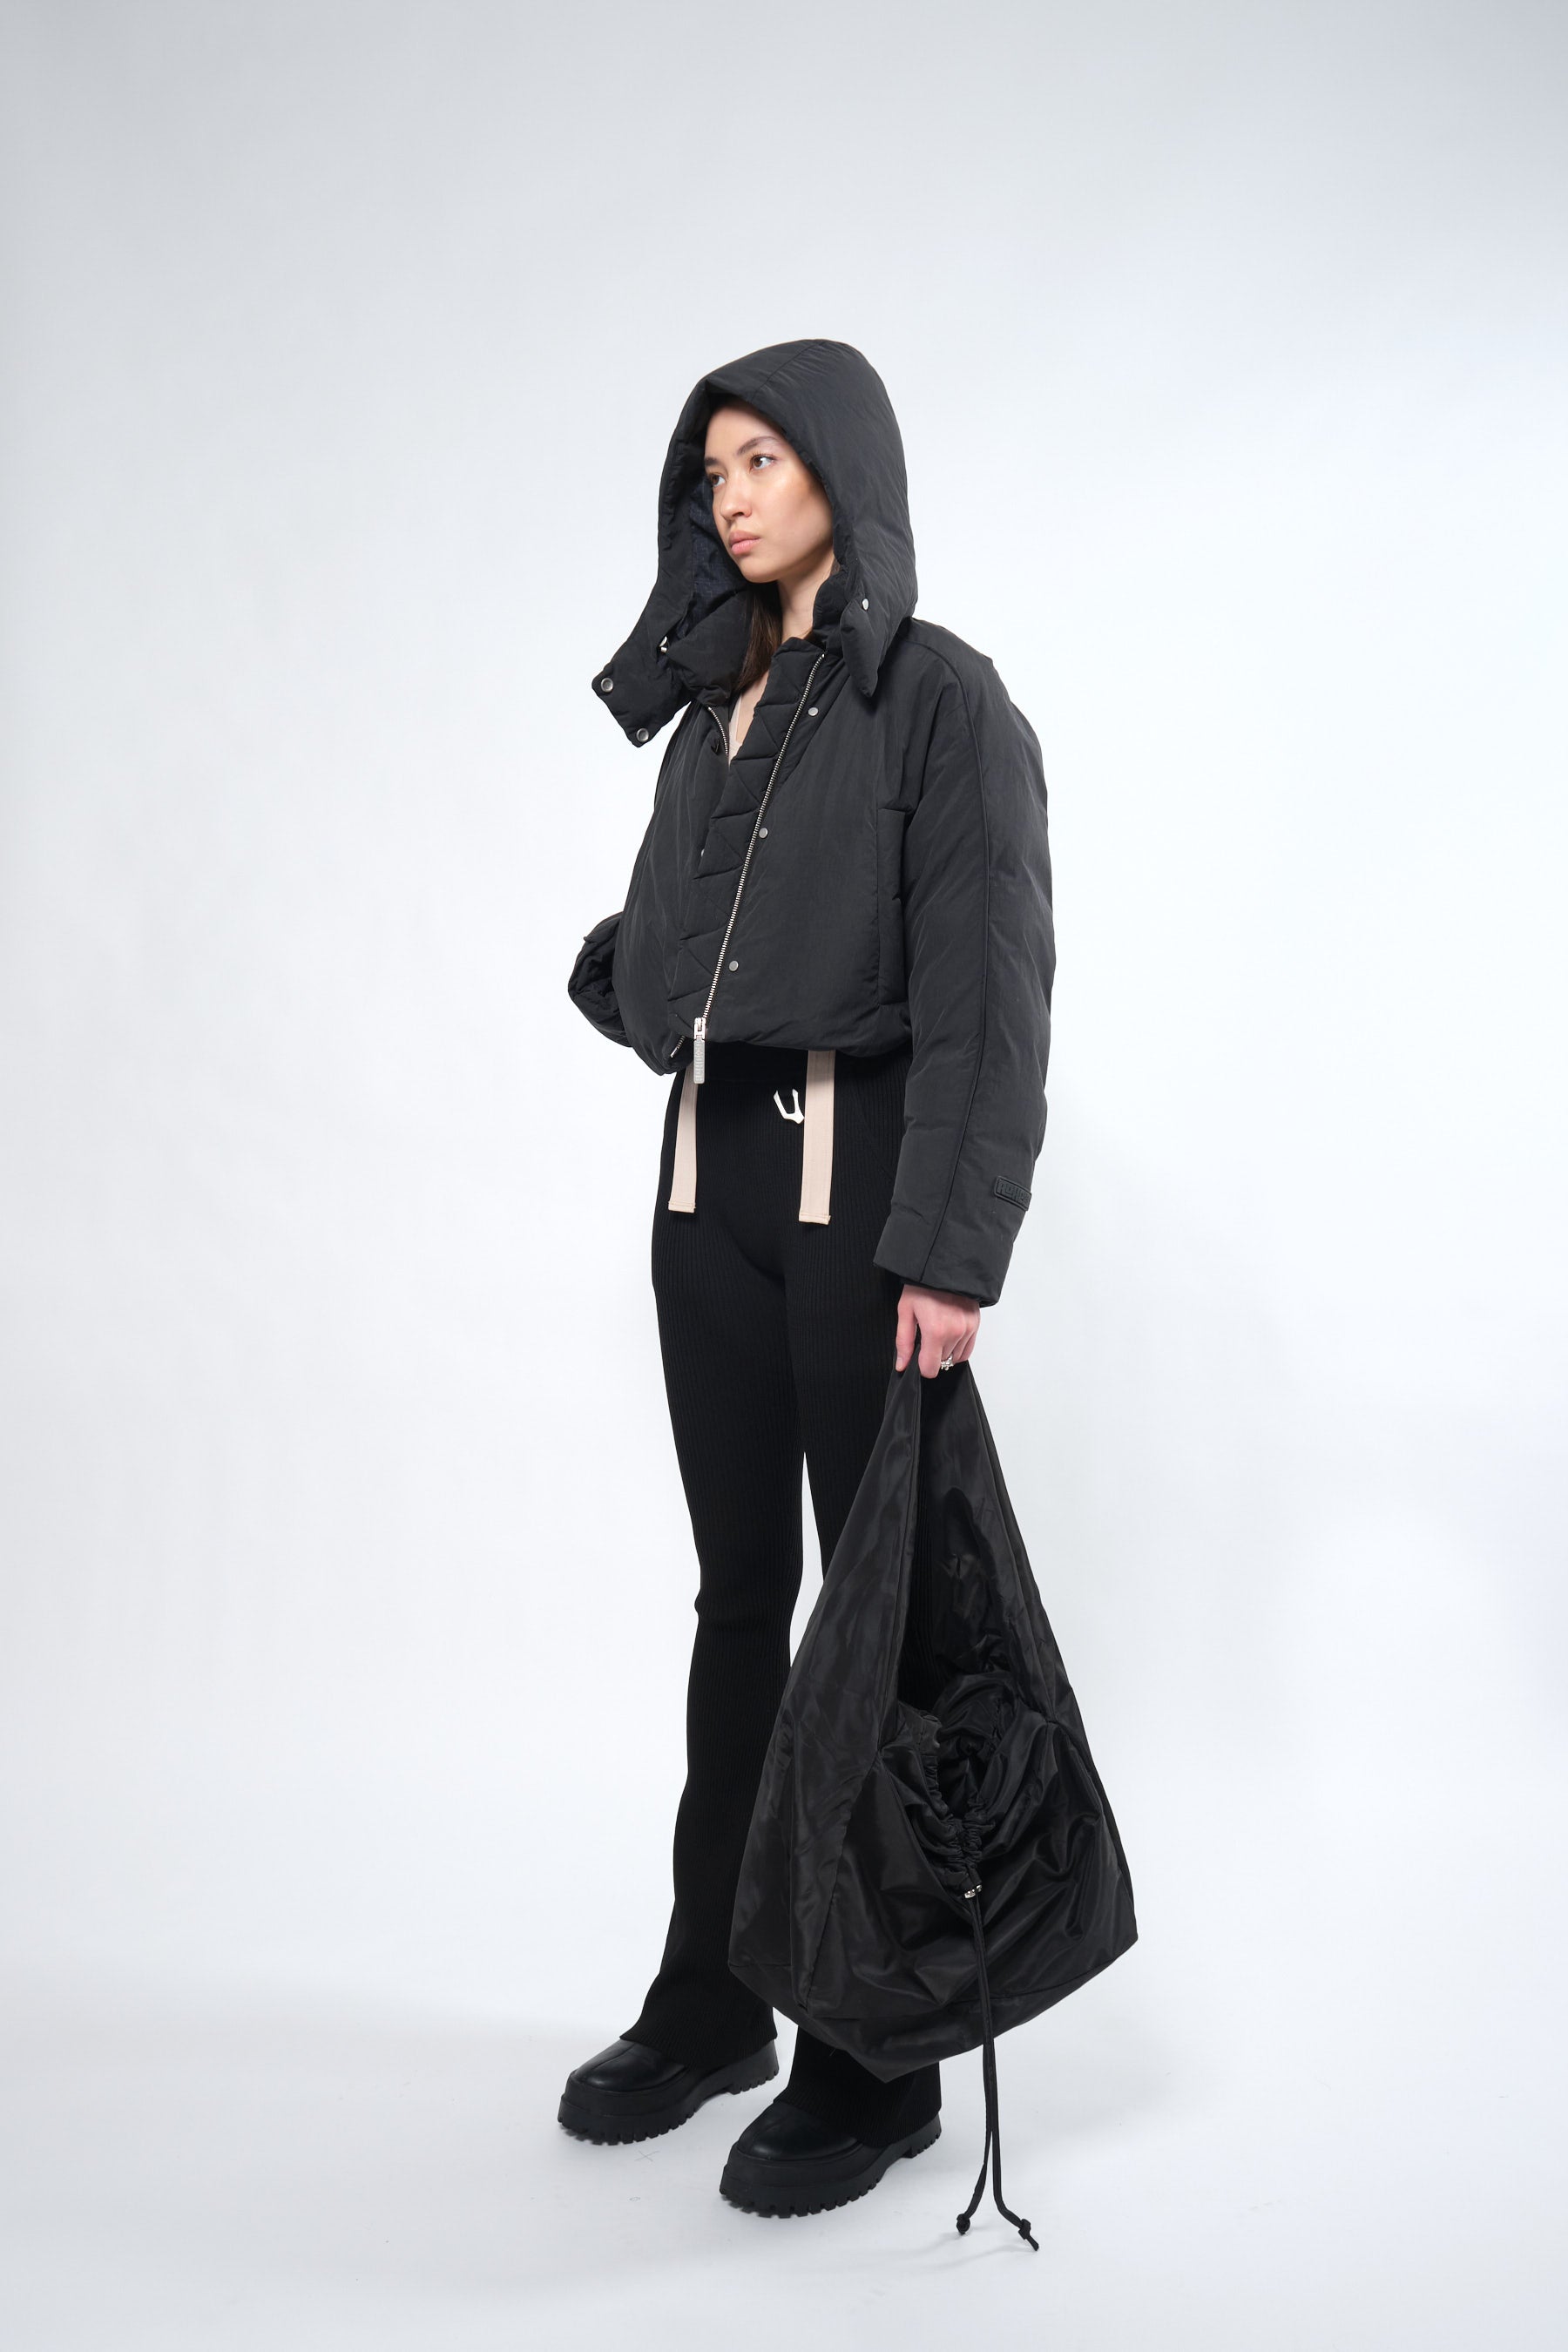  Re:Down® Crop Black Puffer Jacket with Hood - Adhere To  - 4